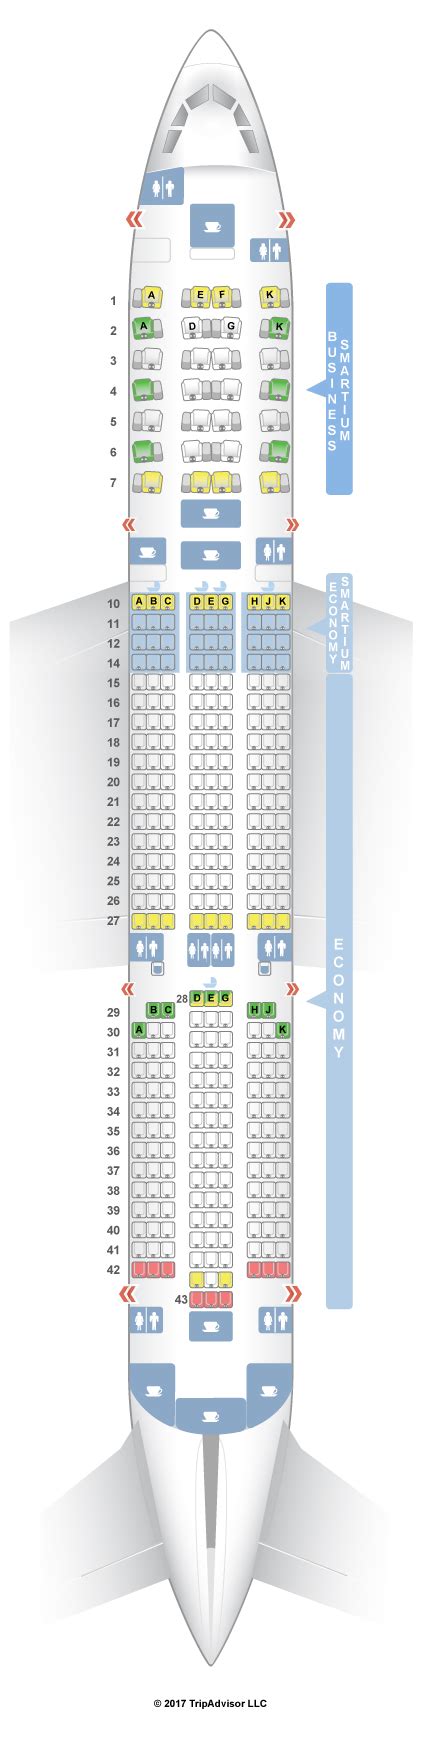 Cathay Pacific Airbus A359 Jet Seating Plan